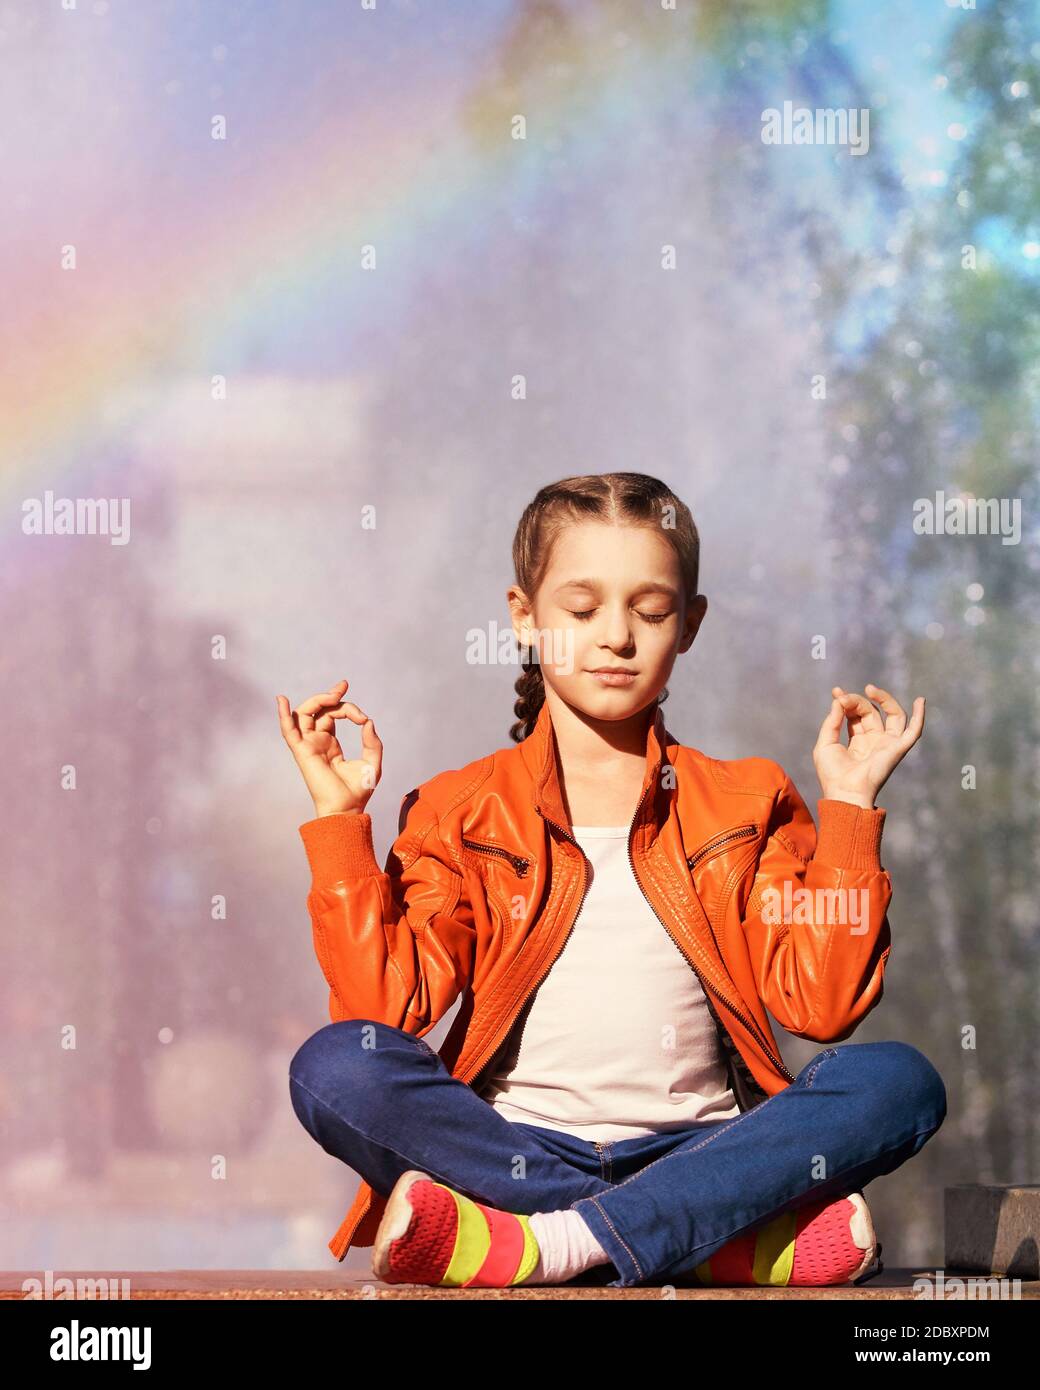 Little girl in bright orange clothes sitting in yoga pose Stock Photo